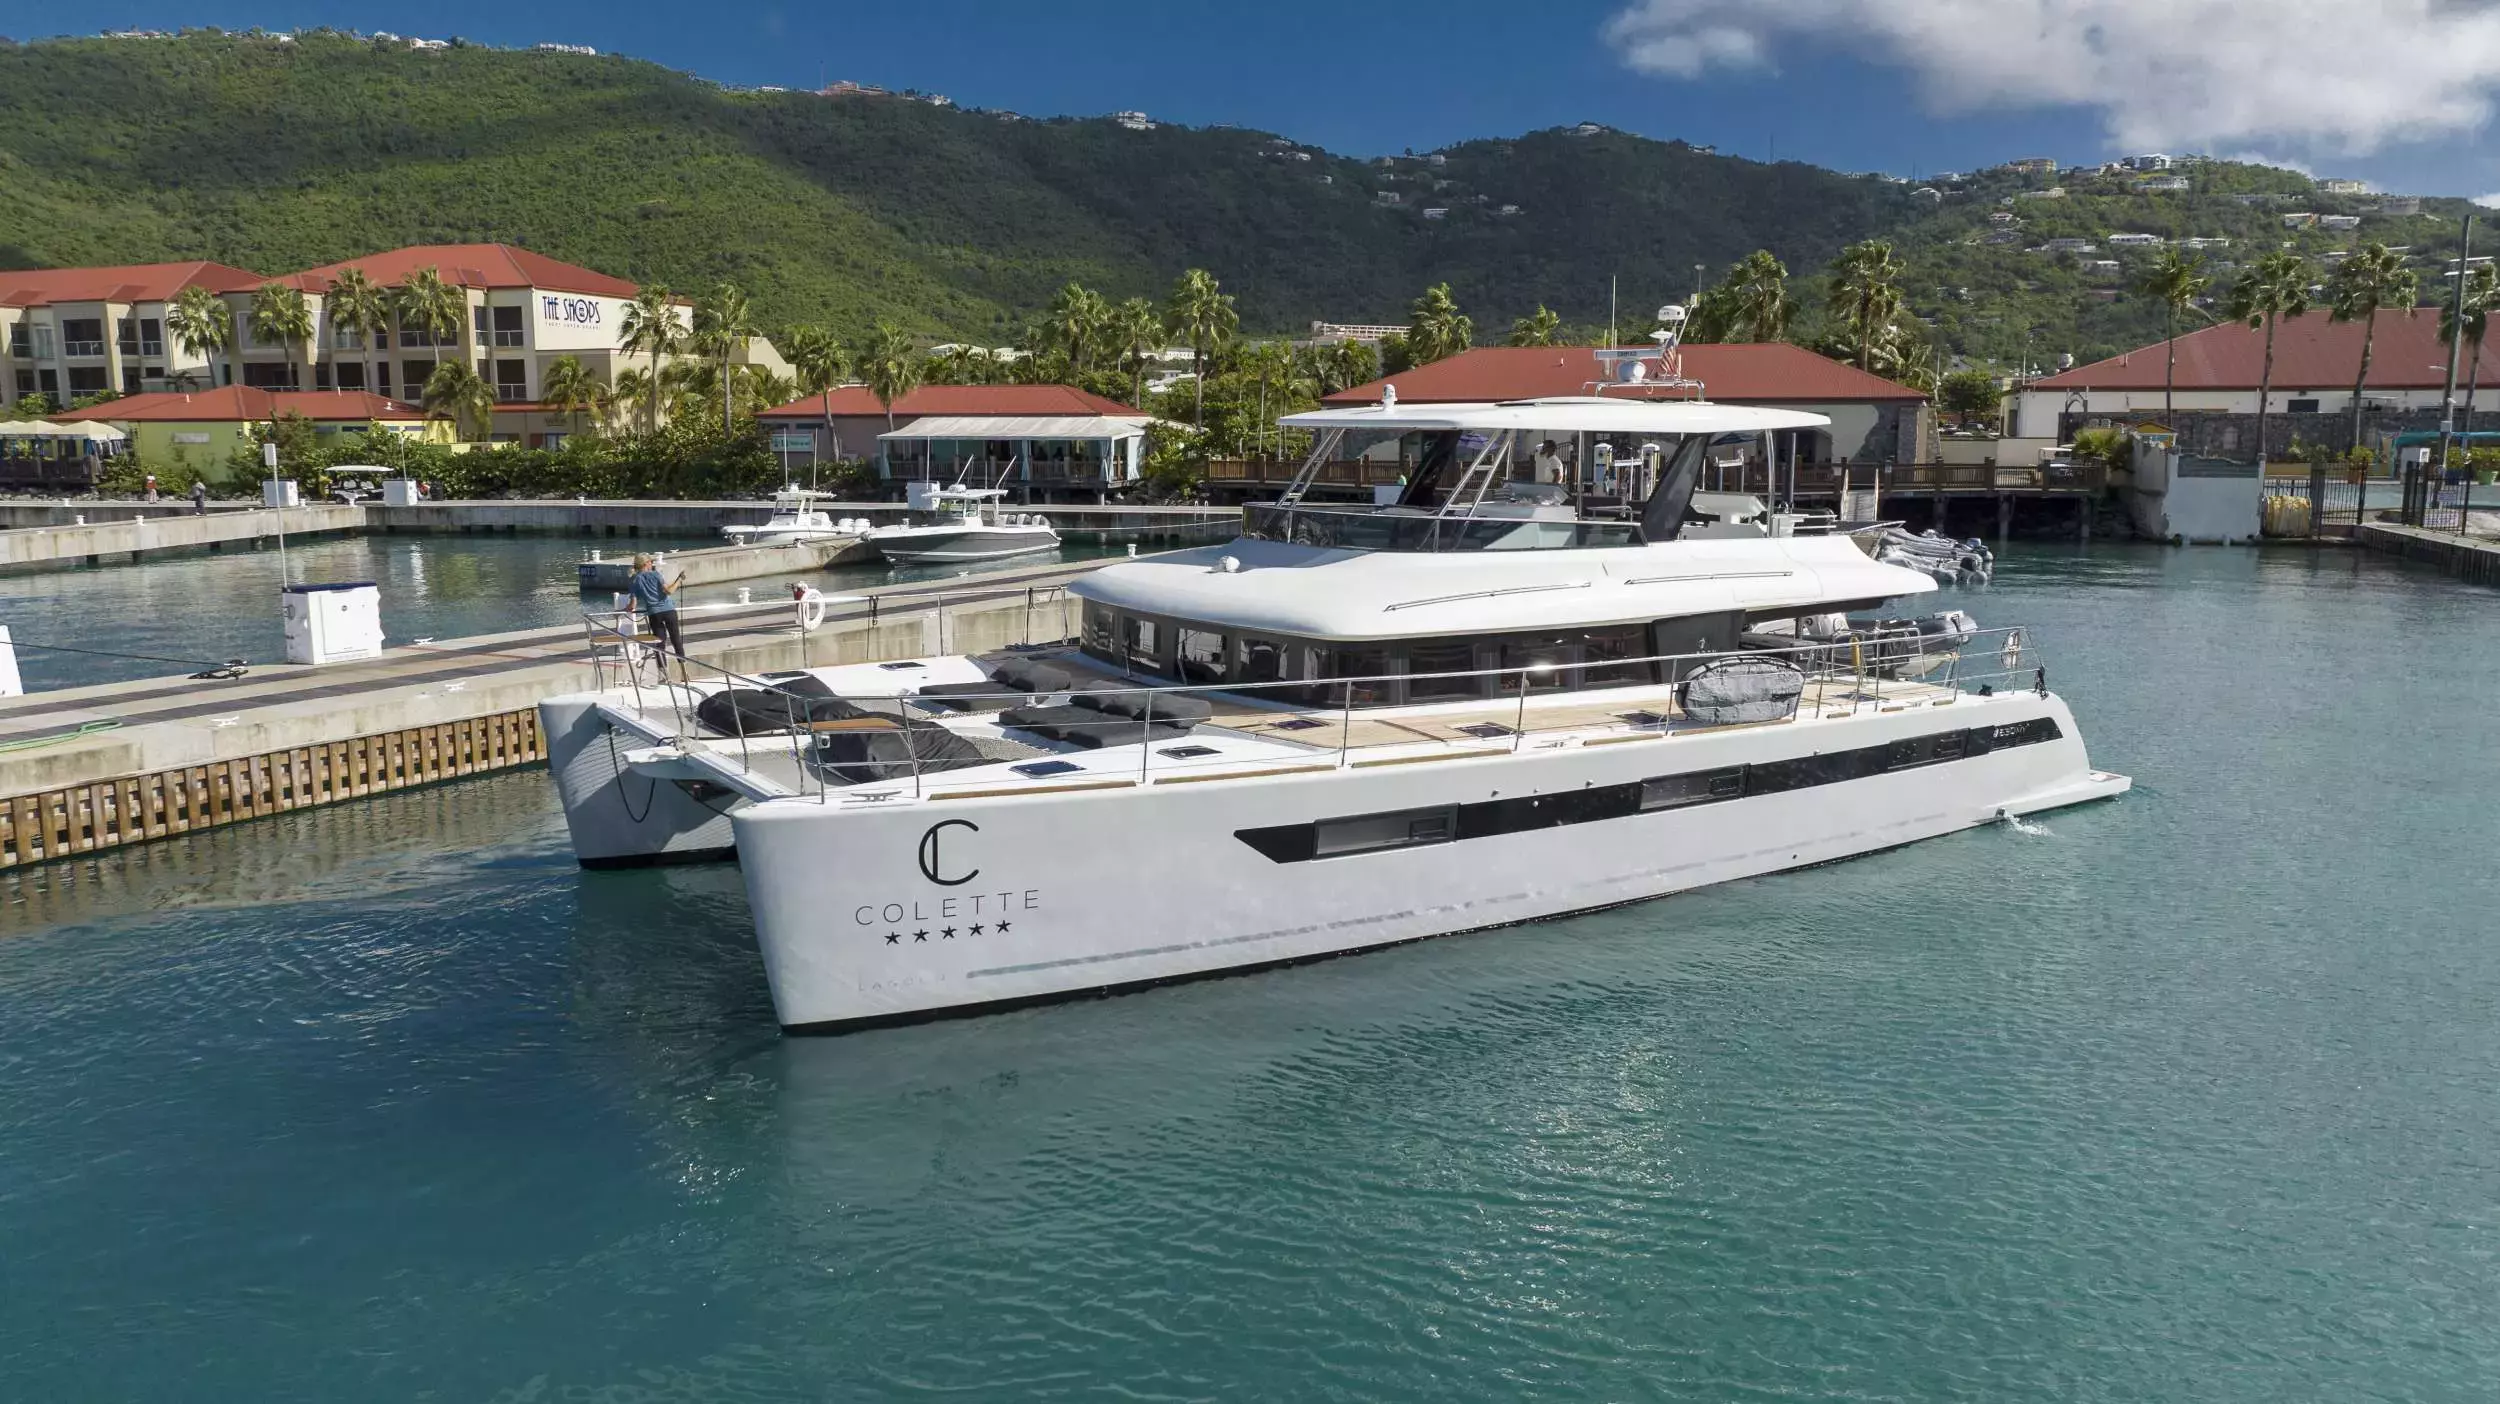 Colette by Lagoon - Top rates for a Charter of a private Power Catamaran in US Virgin Islands